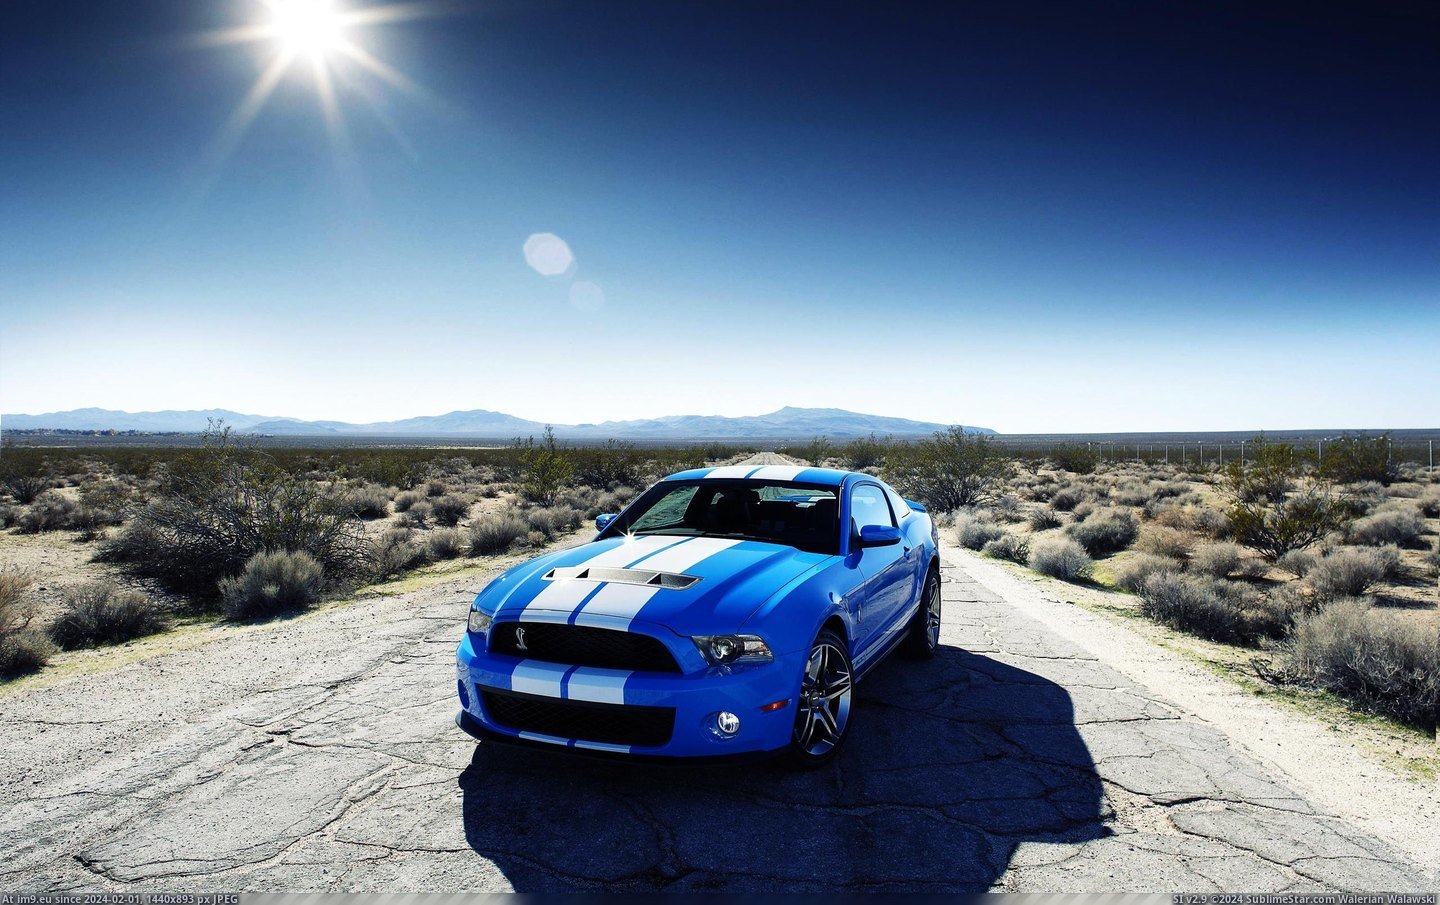 #Wallpaper #Wide #Ford #Gt500 #Car #Shelby Ford Shelby Gt500 Car Wide HD Wallpaper Pic. (Obraz z album Unique HD Wallpapers))